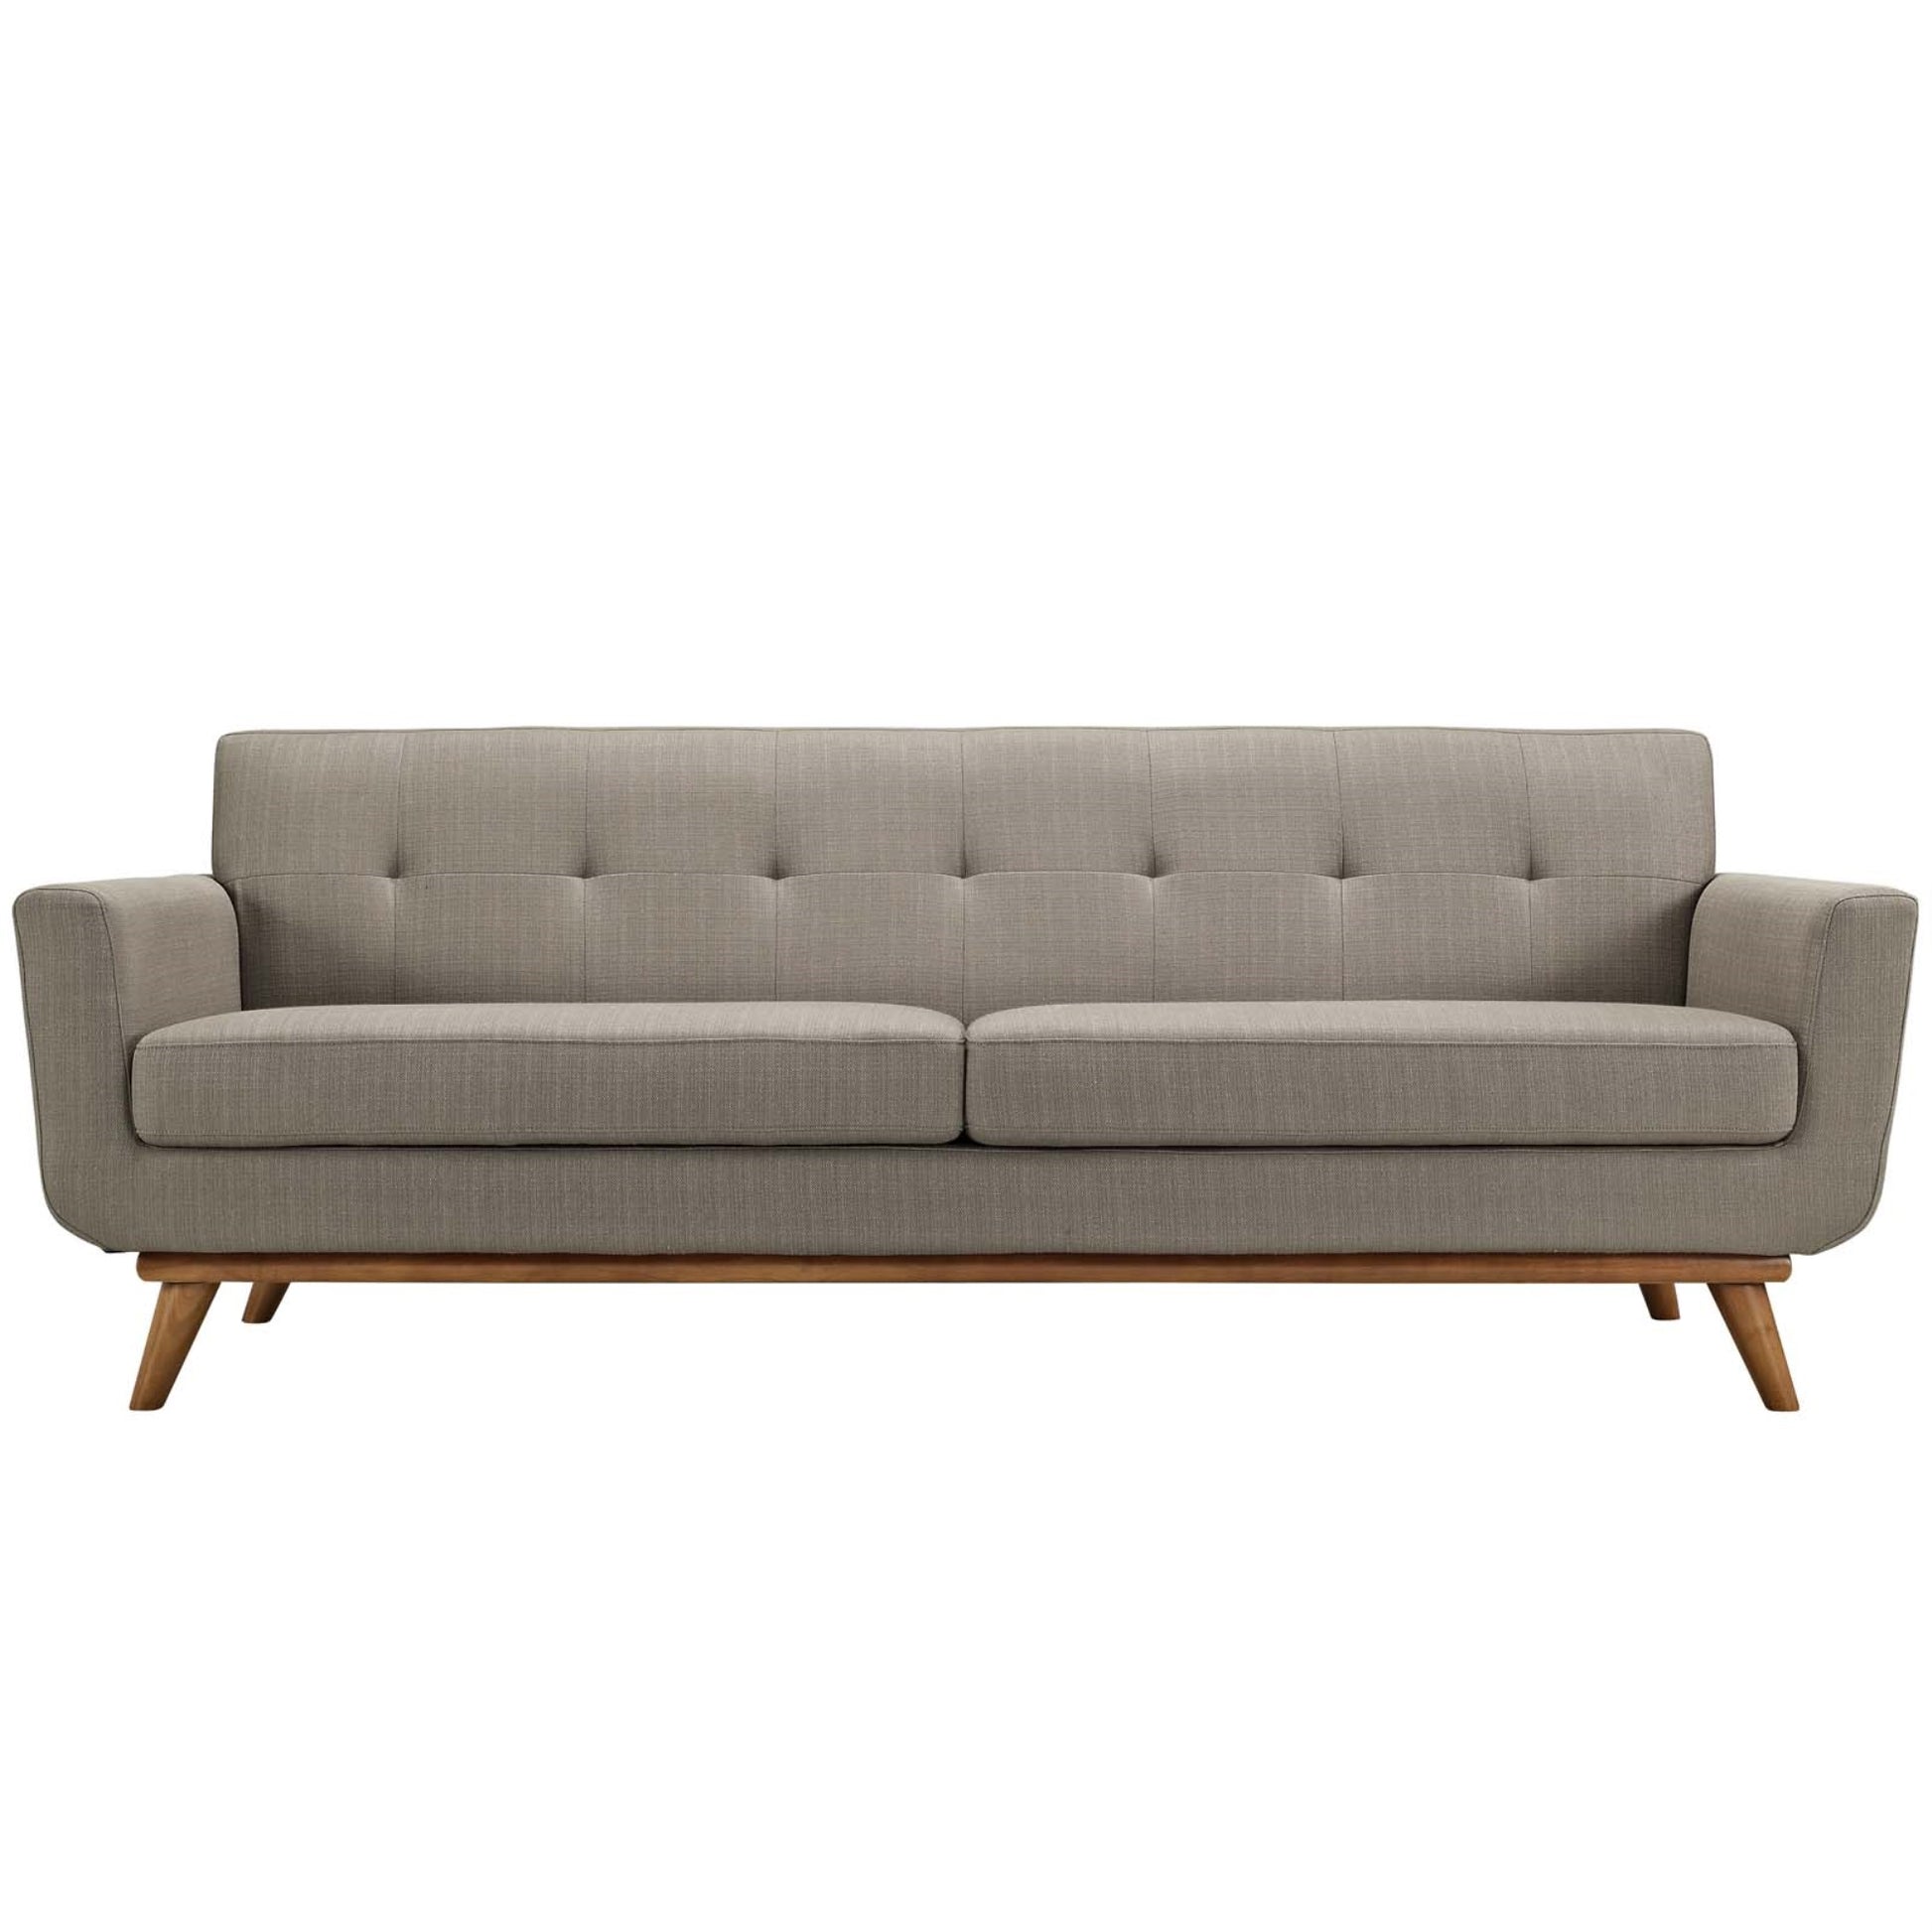 Ergode Engage Sofa - Gently Curved, Dual Cushions, Tufted Buttons, Sturdy Cherry Legs - Perfect for Lounging, Relaxing, and Entertaining